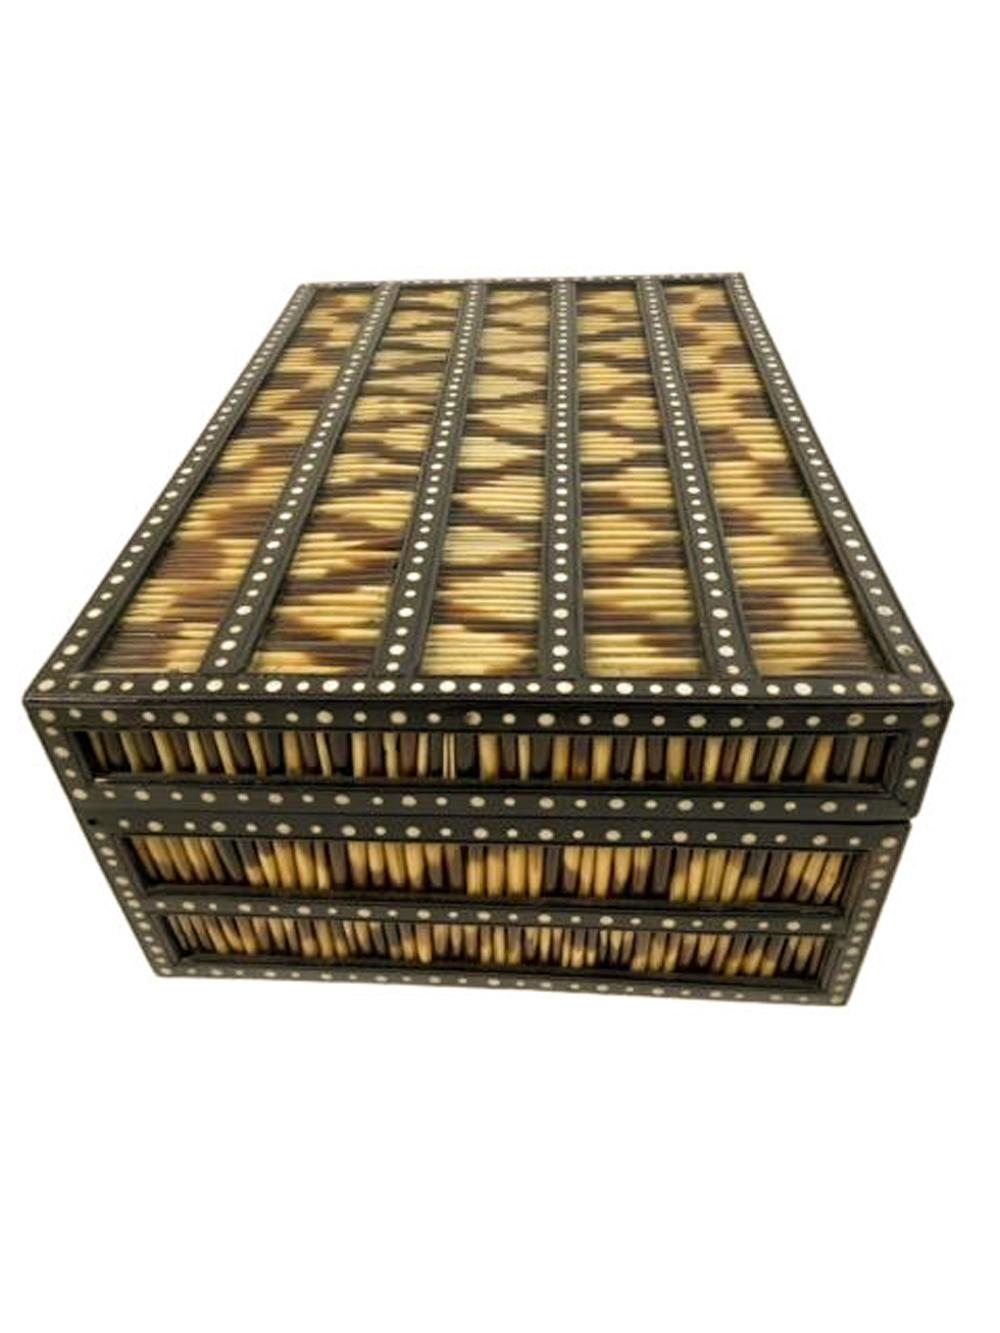 Bone 19th Century Anglo Ceylonese Porcupine Quill Box with Interior Divided Tray For Sale